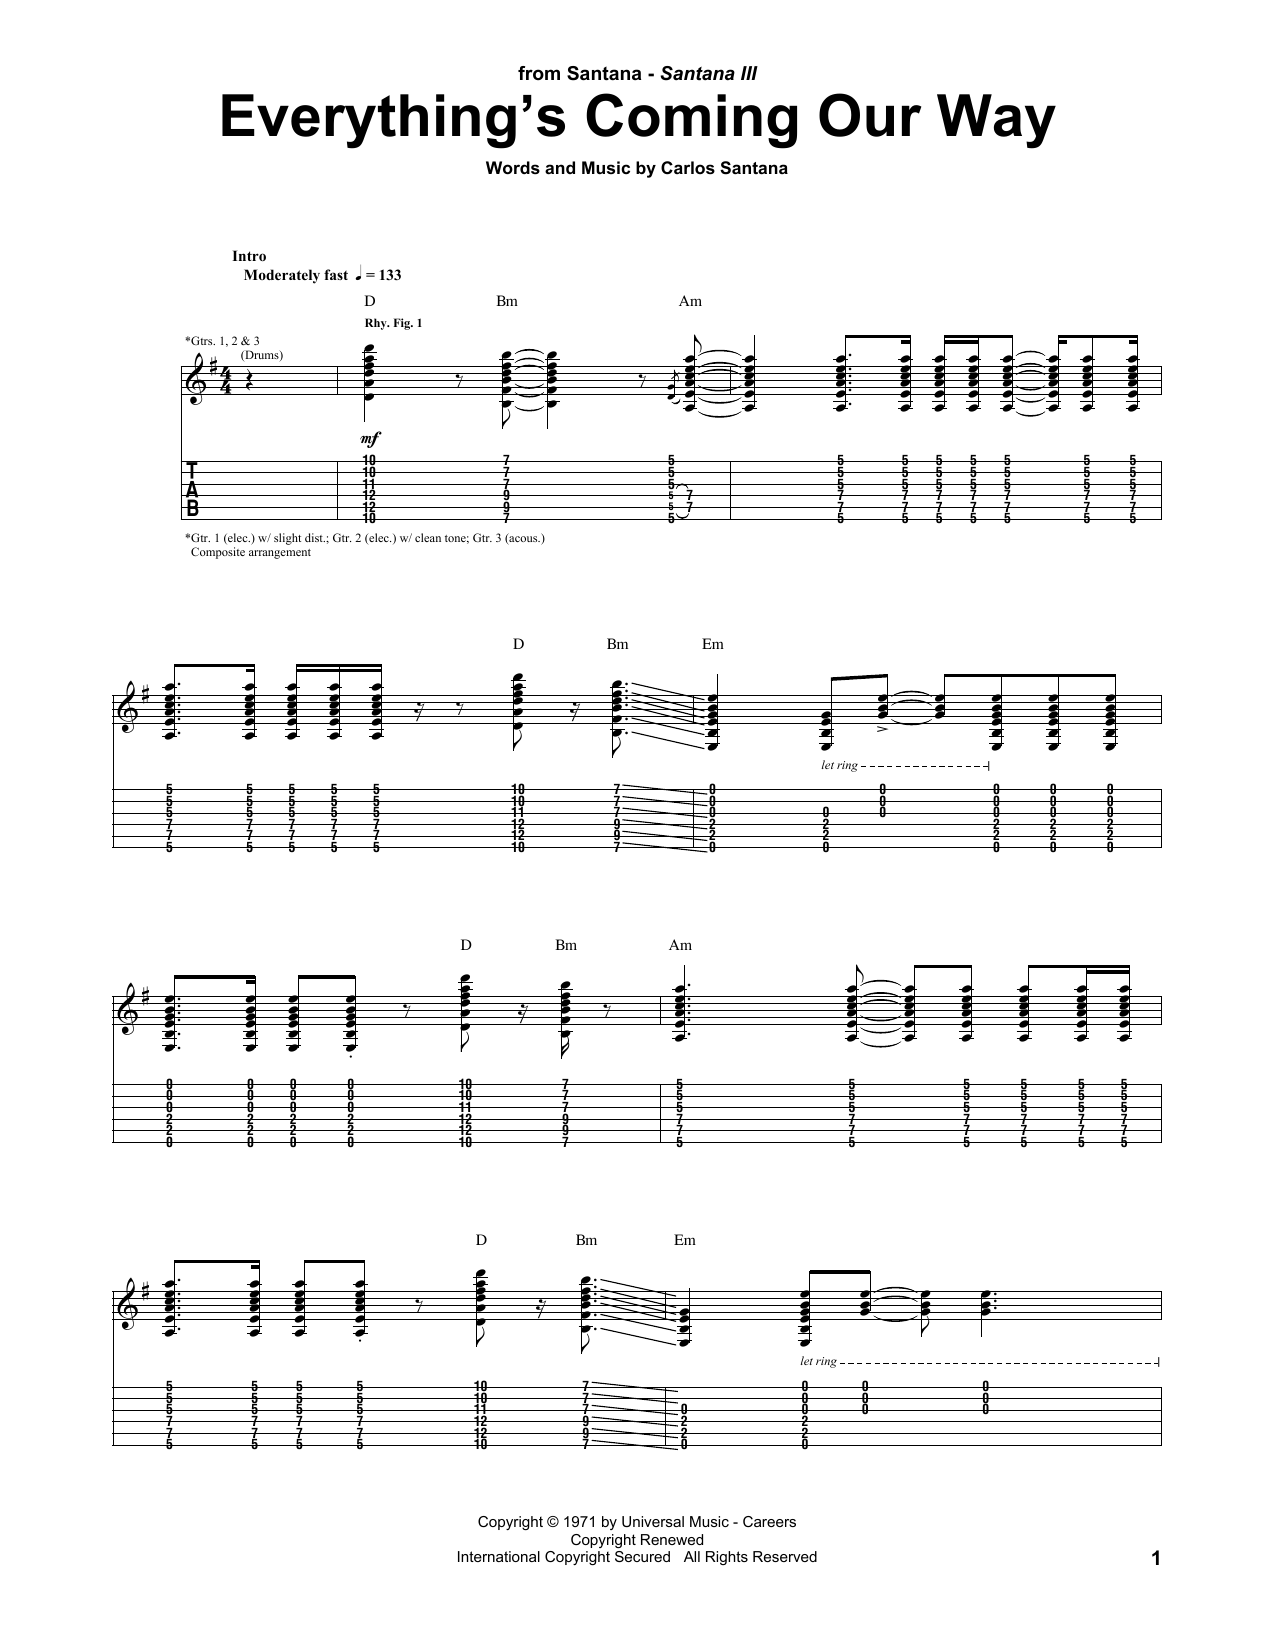 Download Santana Everything's Coming Our Way Sheet Music